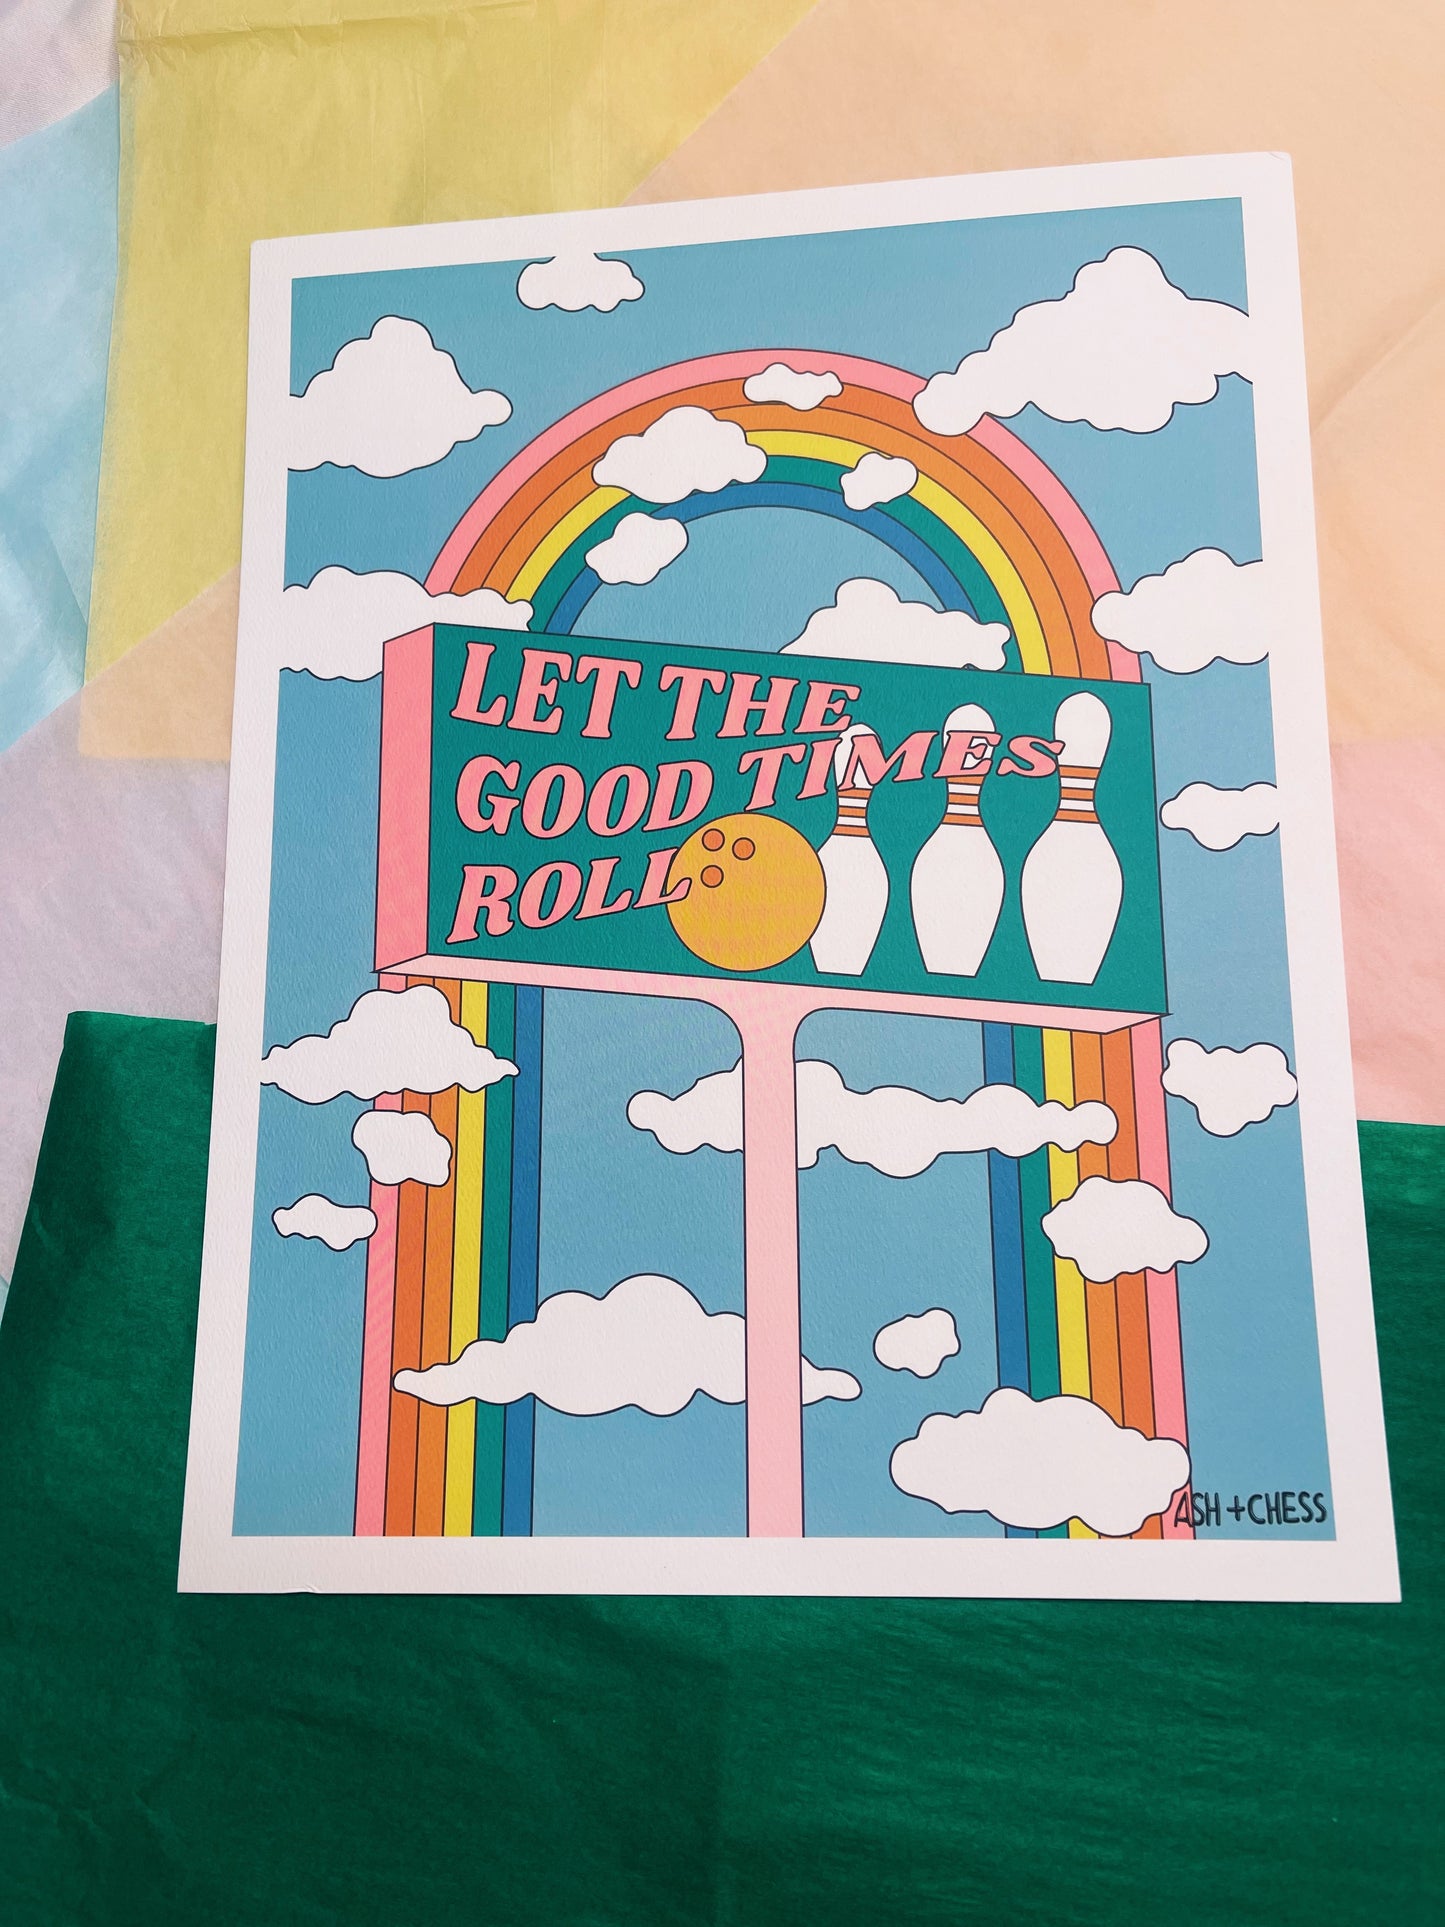 11 x 14 let the good time roll print